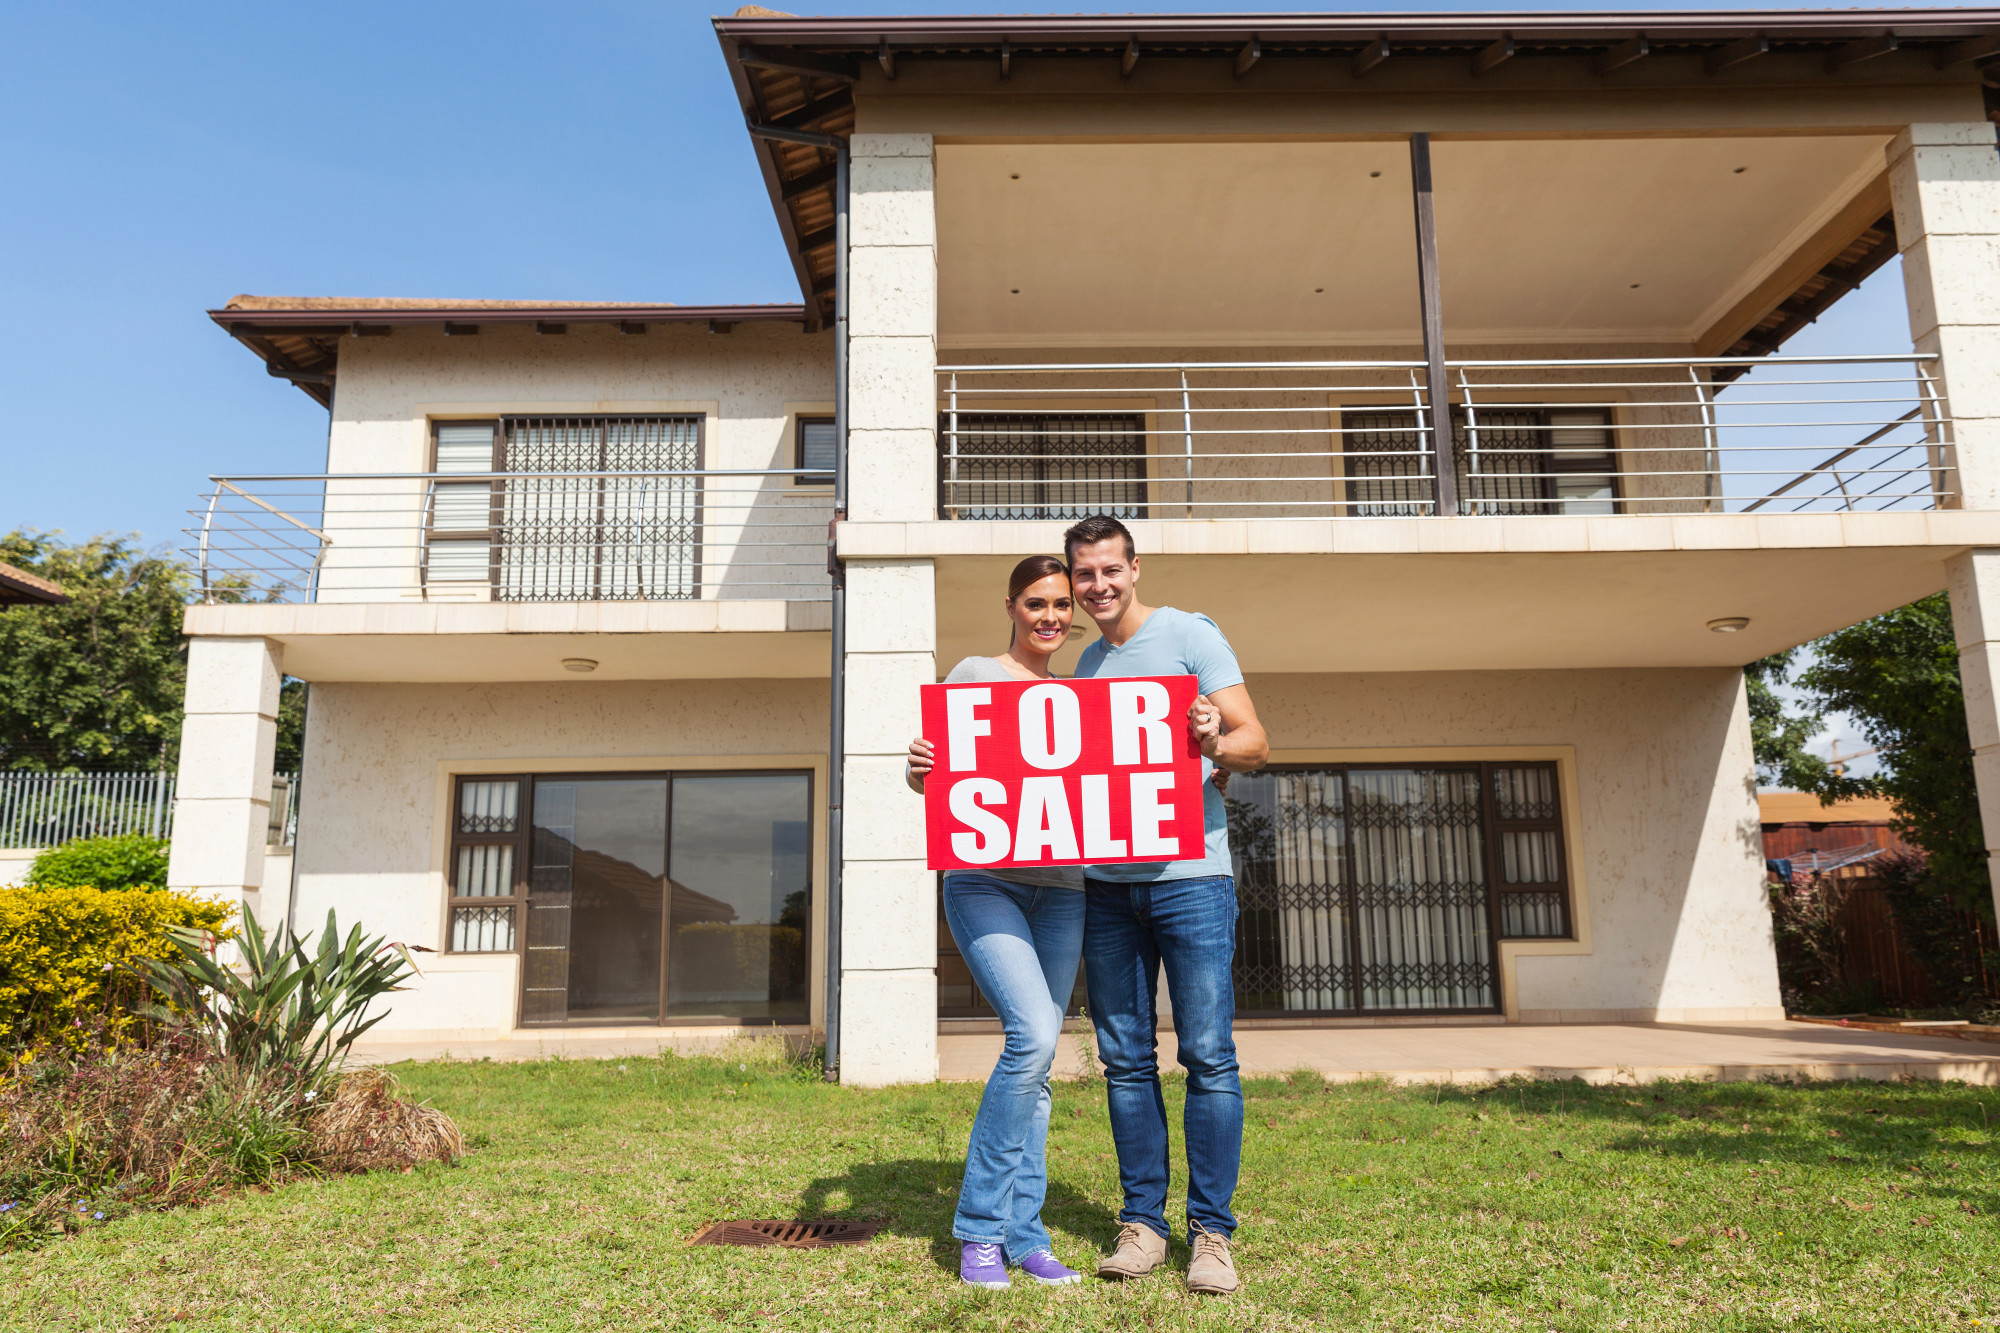 When you want to immediately sell your house for top dollar without the assistance of a realtor, explore simple ways to move out and move on!